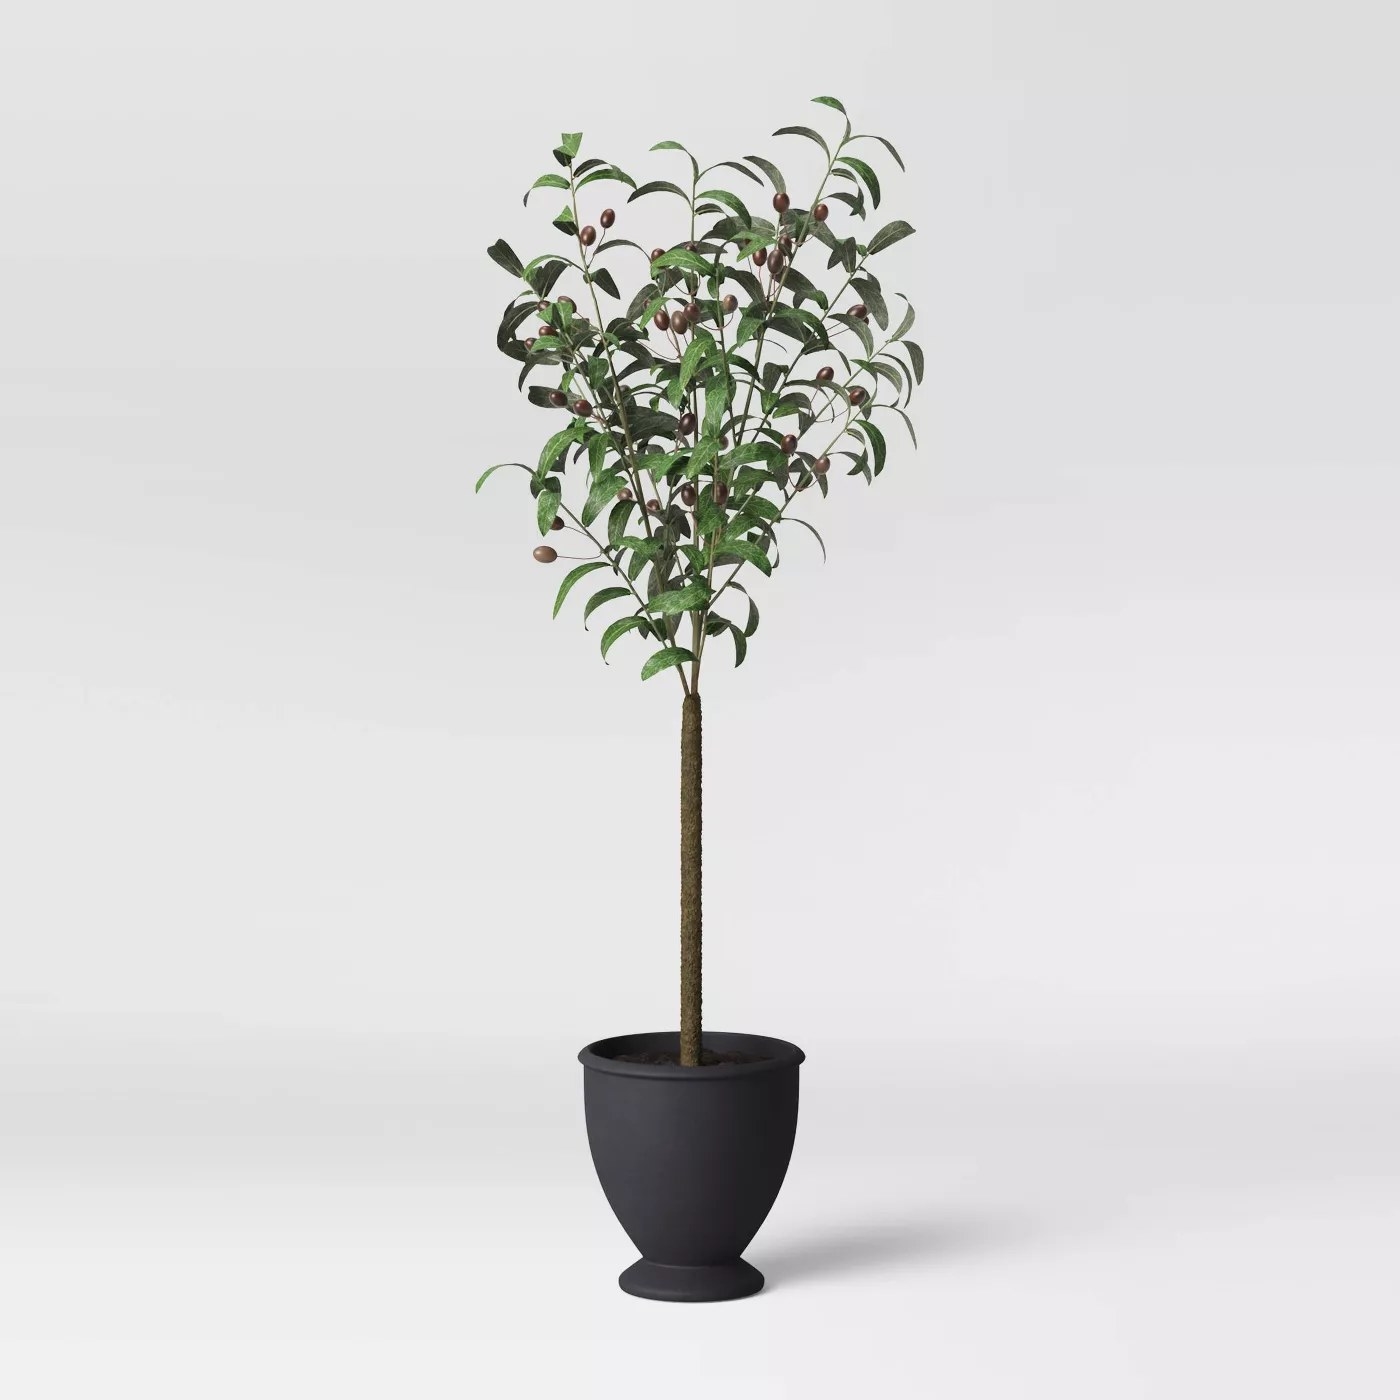 The fake tree in a black pot